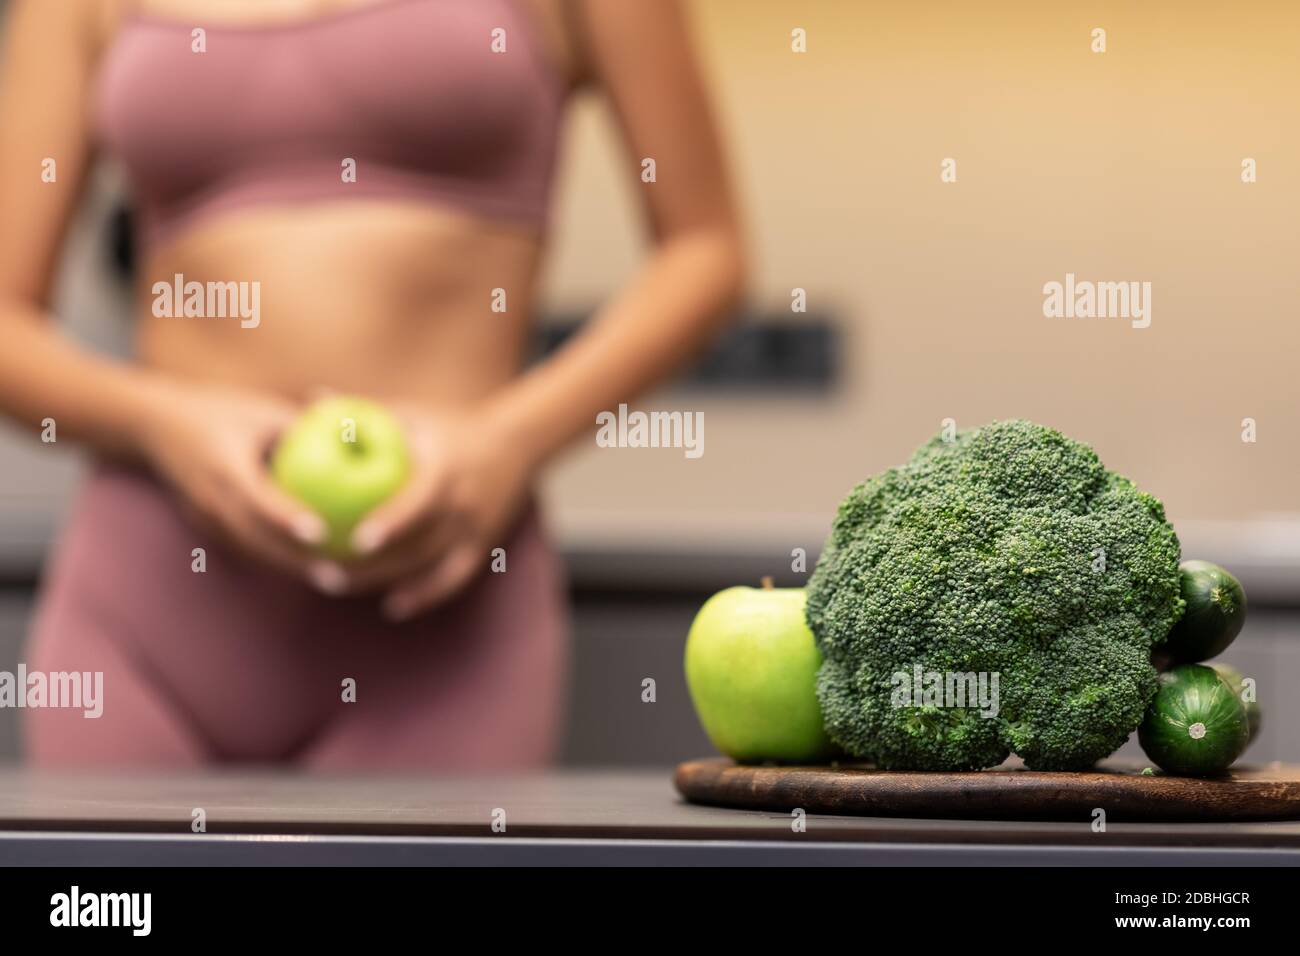 Skinny Girl Dieting Standing In Kitchen, Focus On Vegetables, Cropped Stock Photo